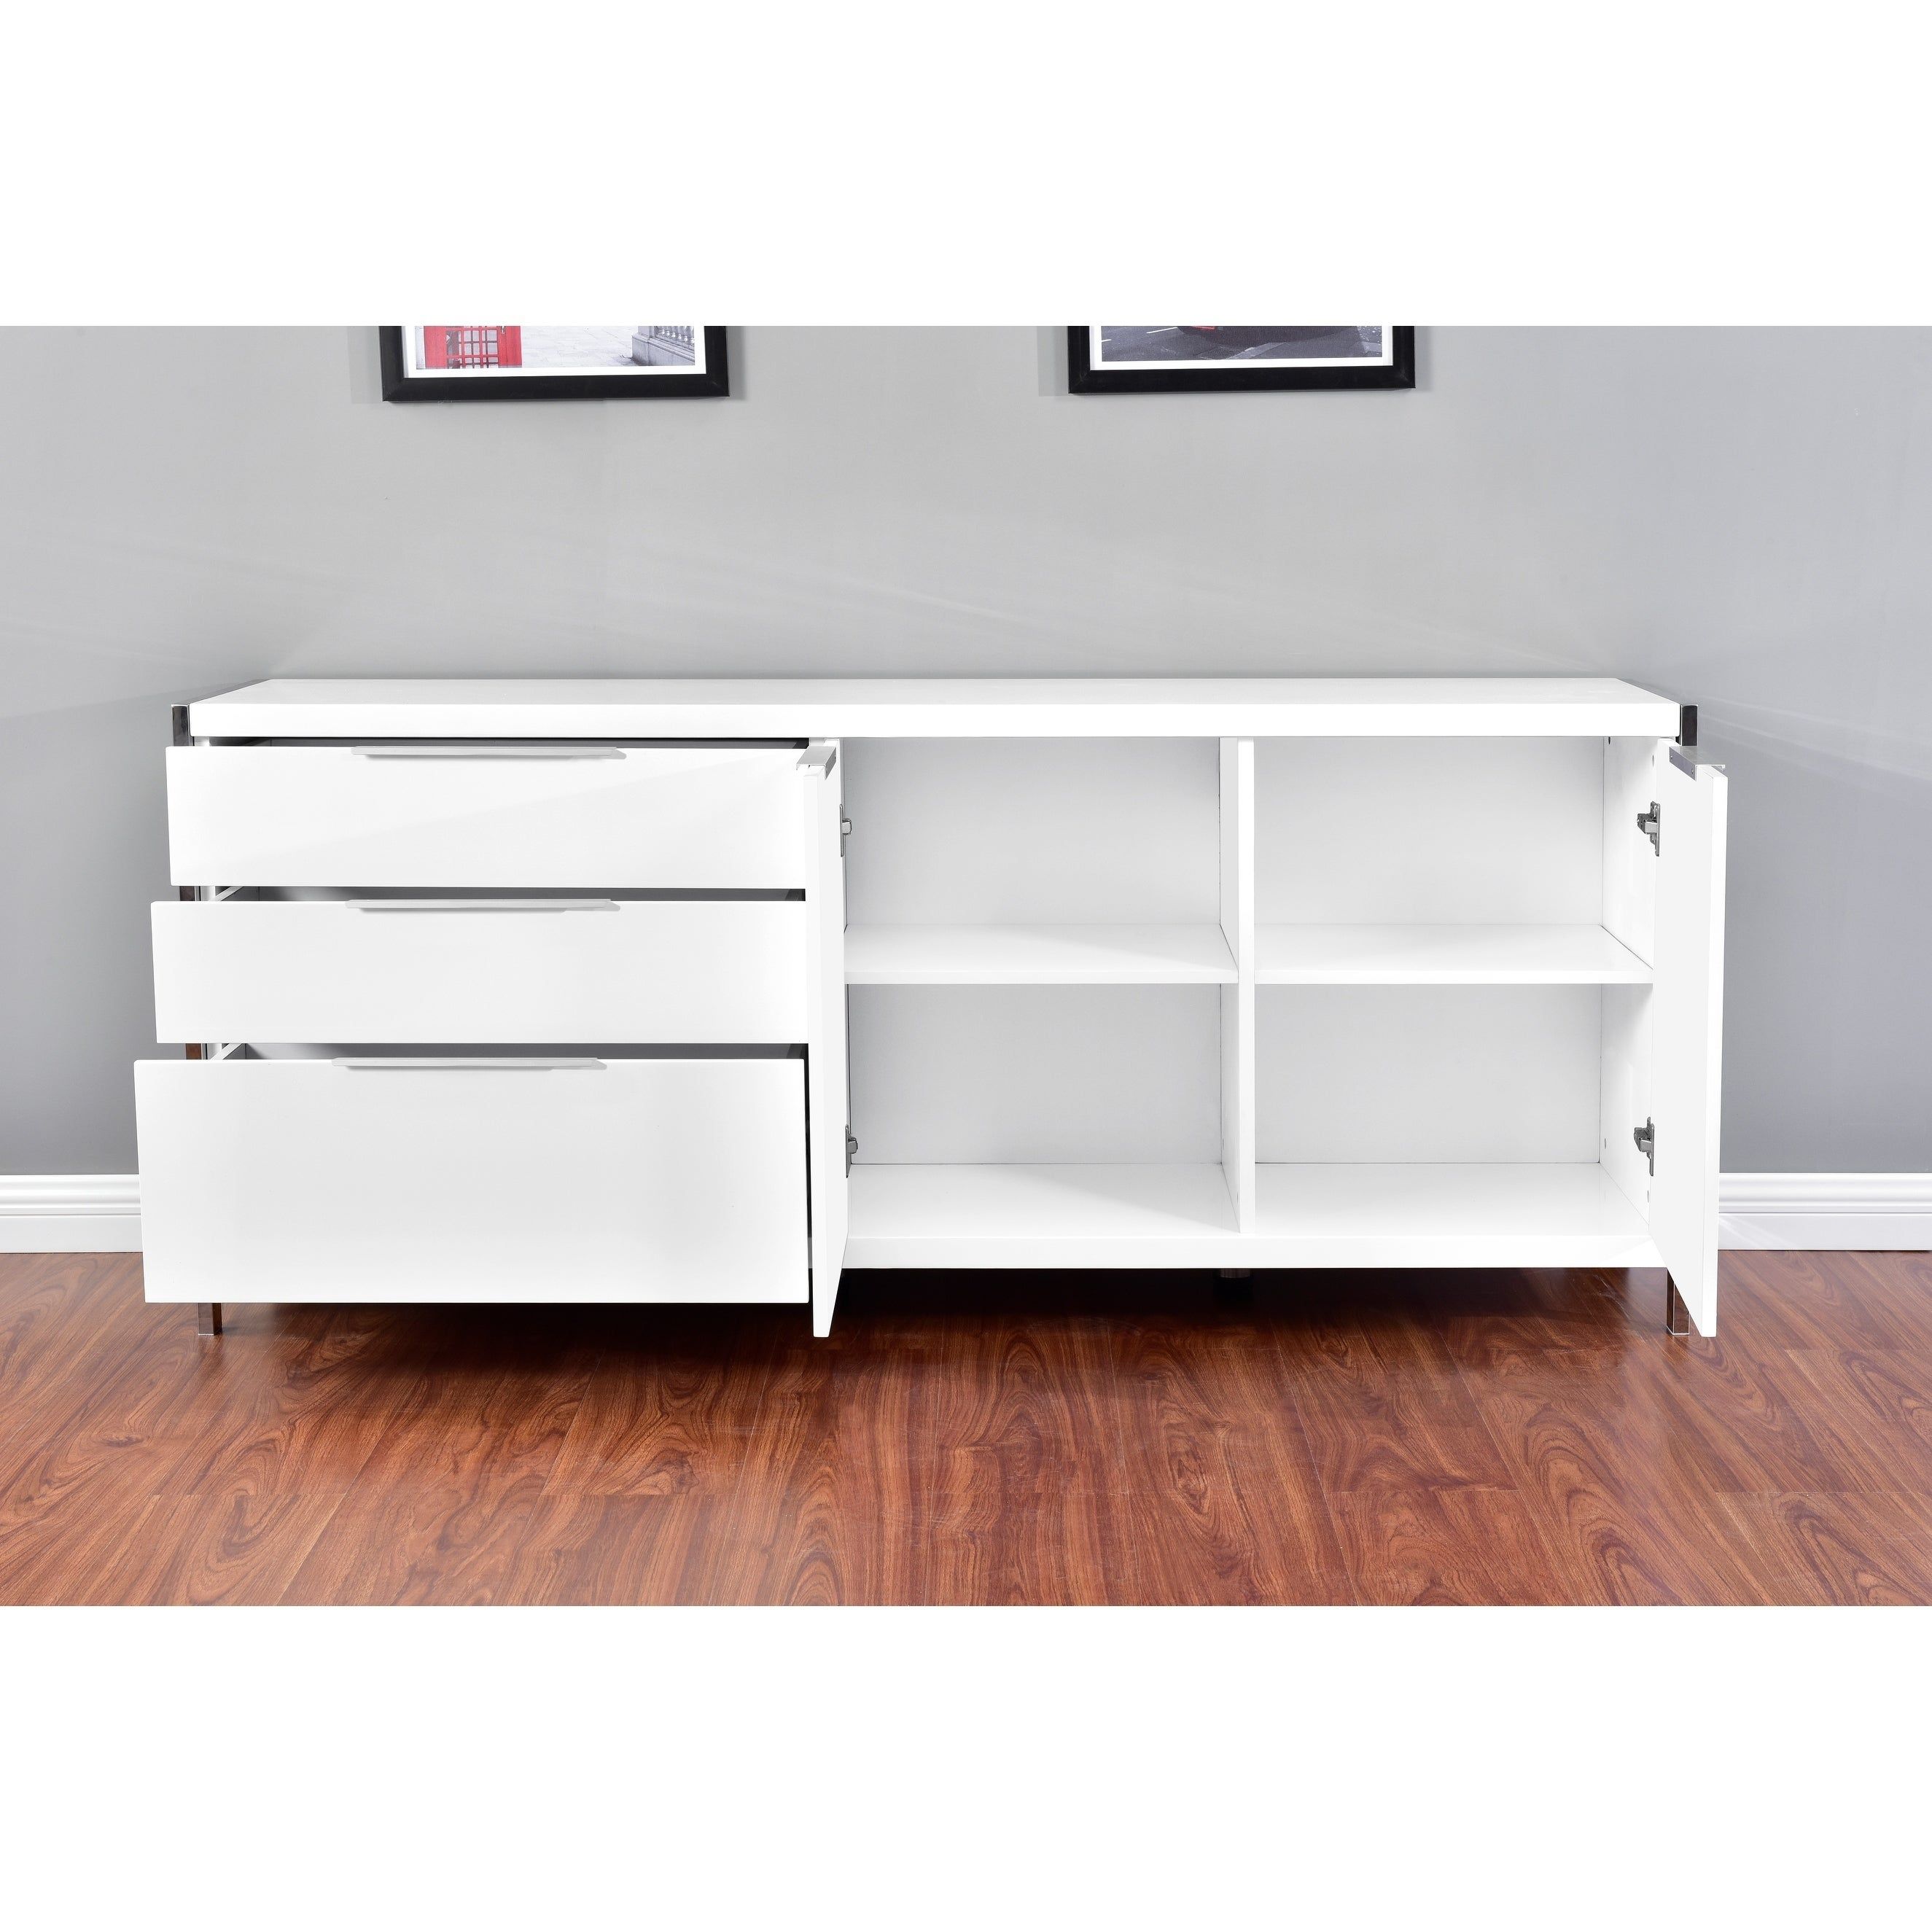 Best Quality Furniture Modern Lacquer 2 Door, 3 Drawer Cabinet Intended For Modern Lacquer 2 Door 3 Drawer Buffets (View 4 of 30)